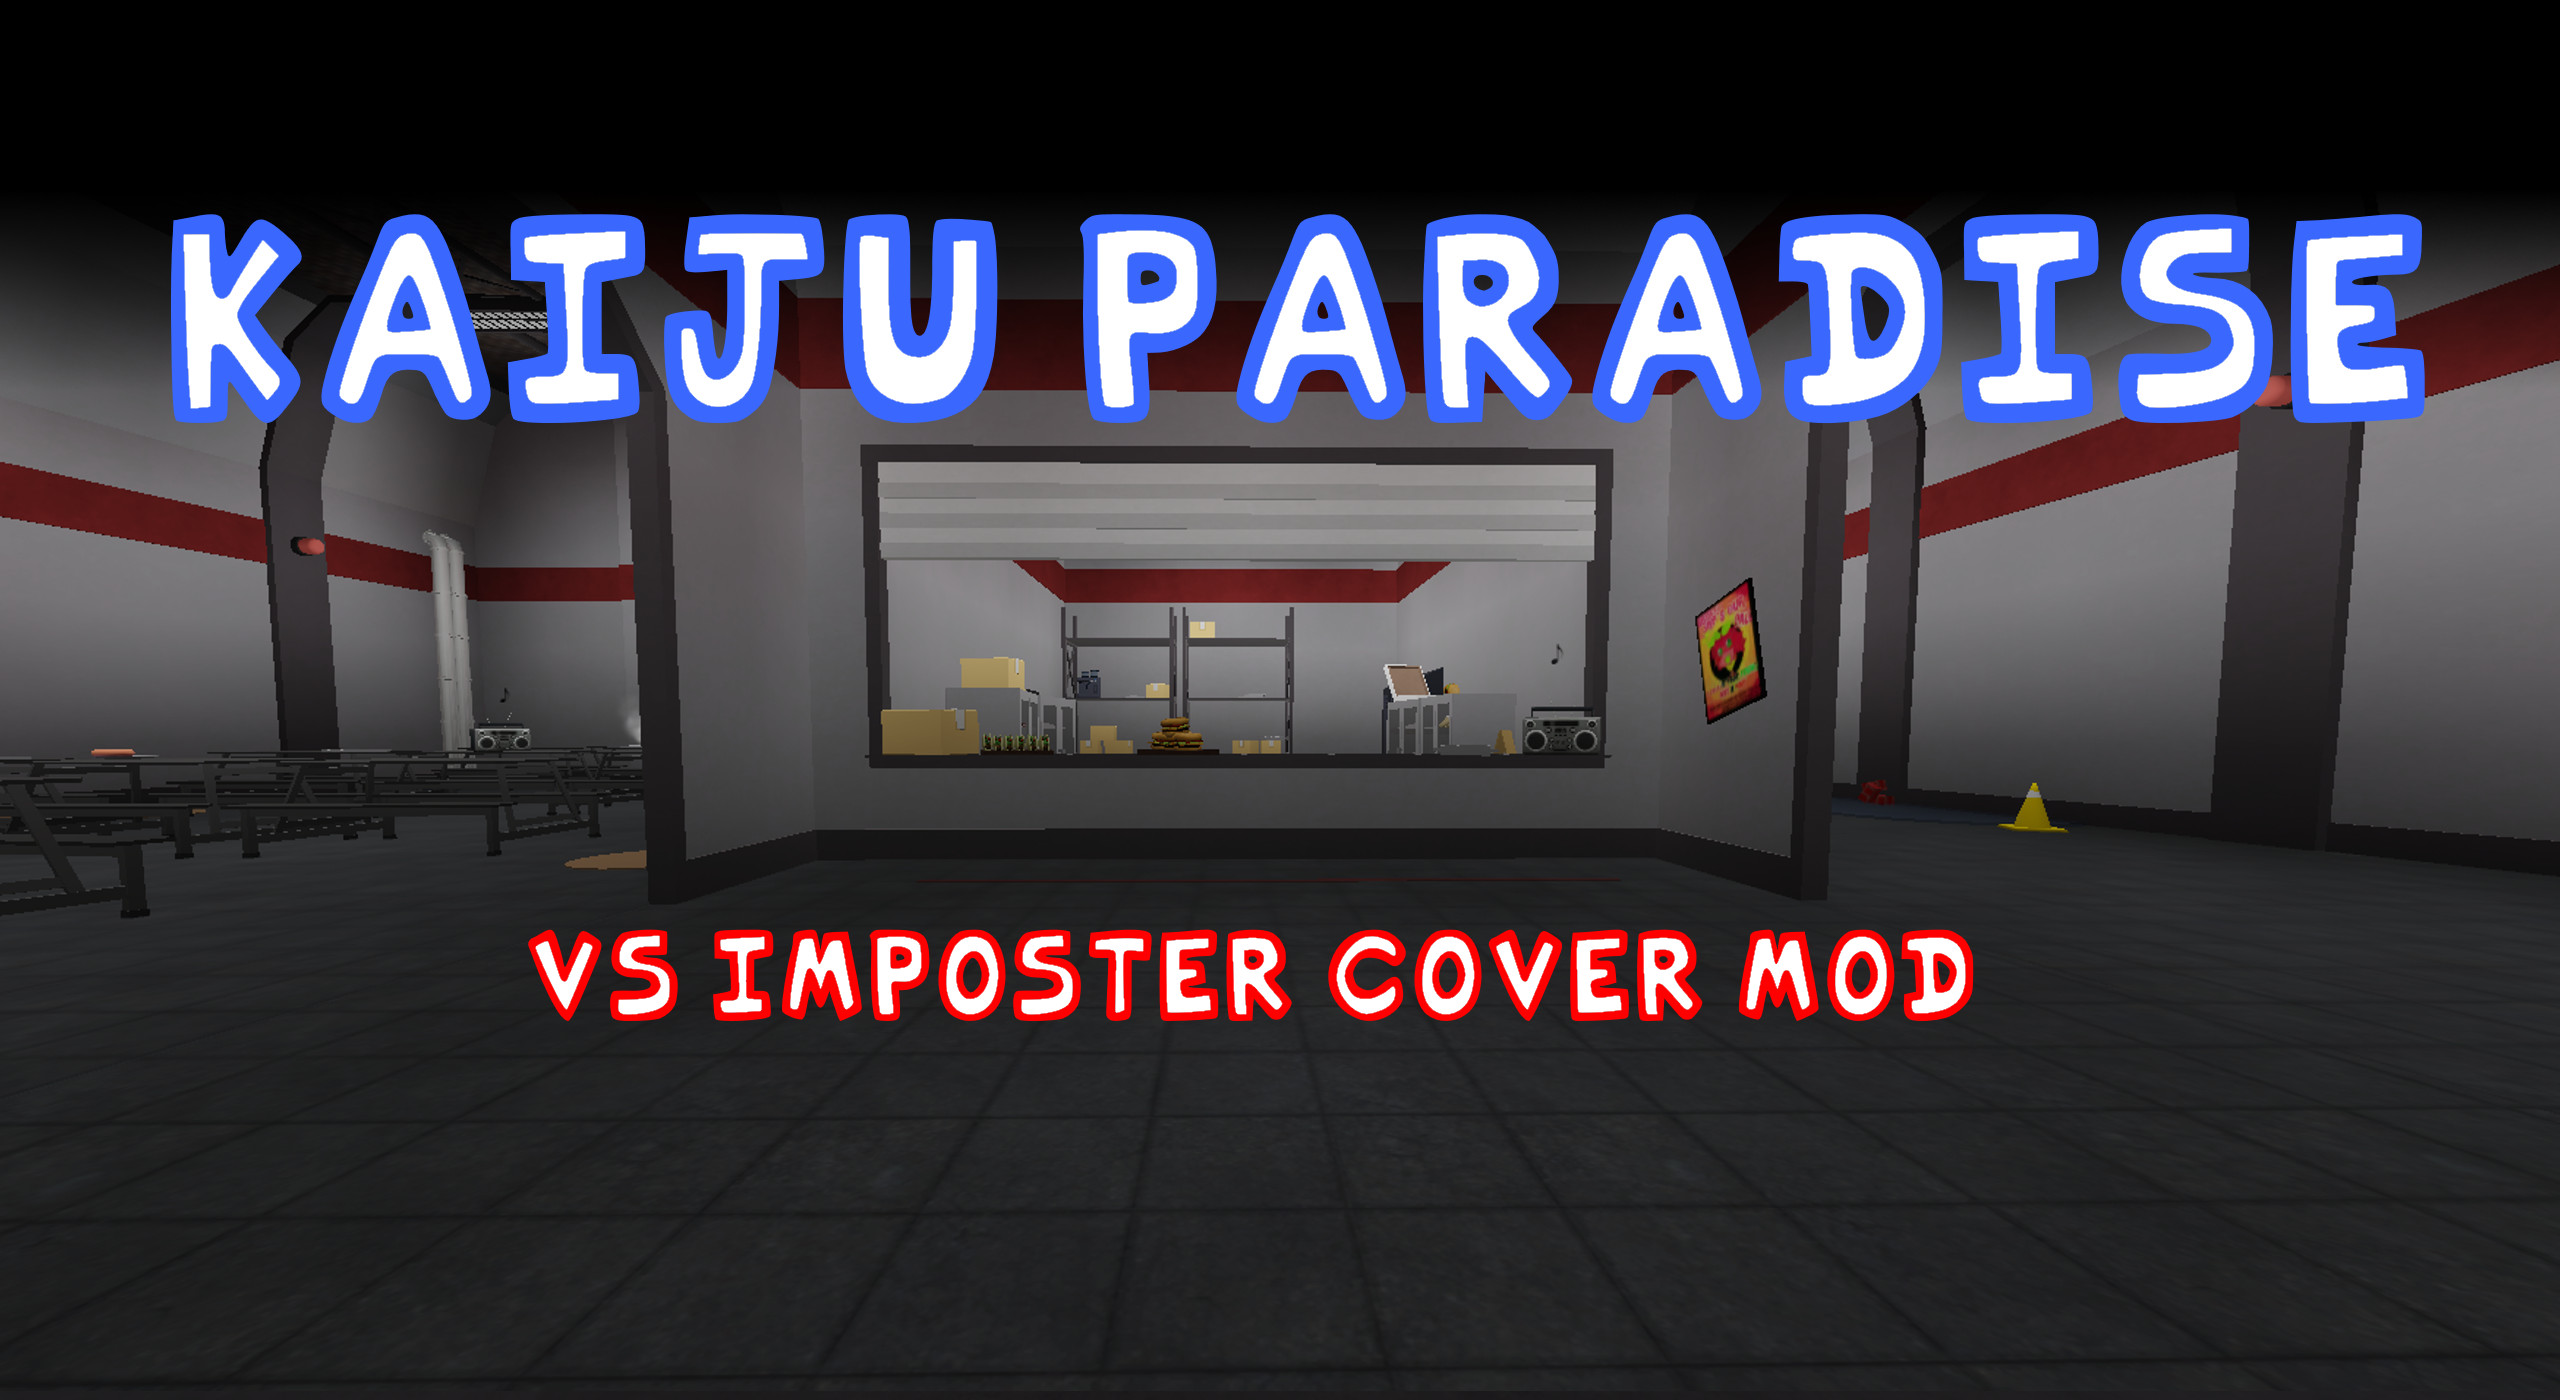 Kaiju paradise [VS Imposter cover mod] Cancelled [Friday Night